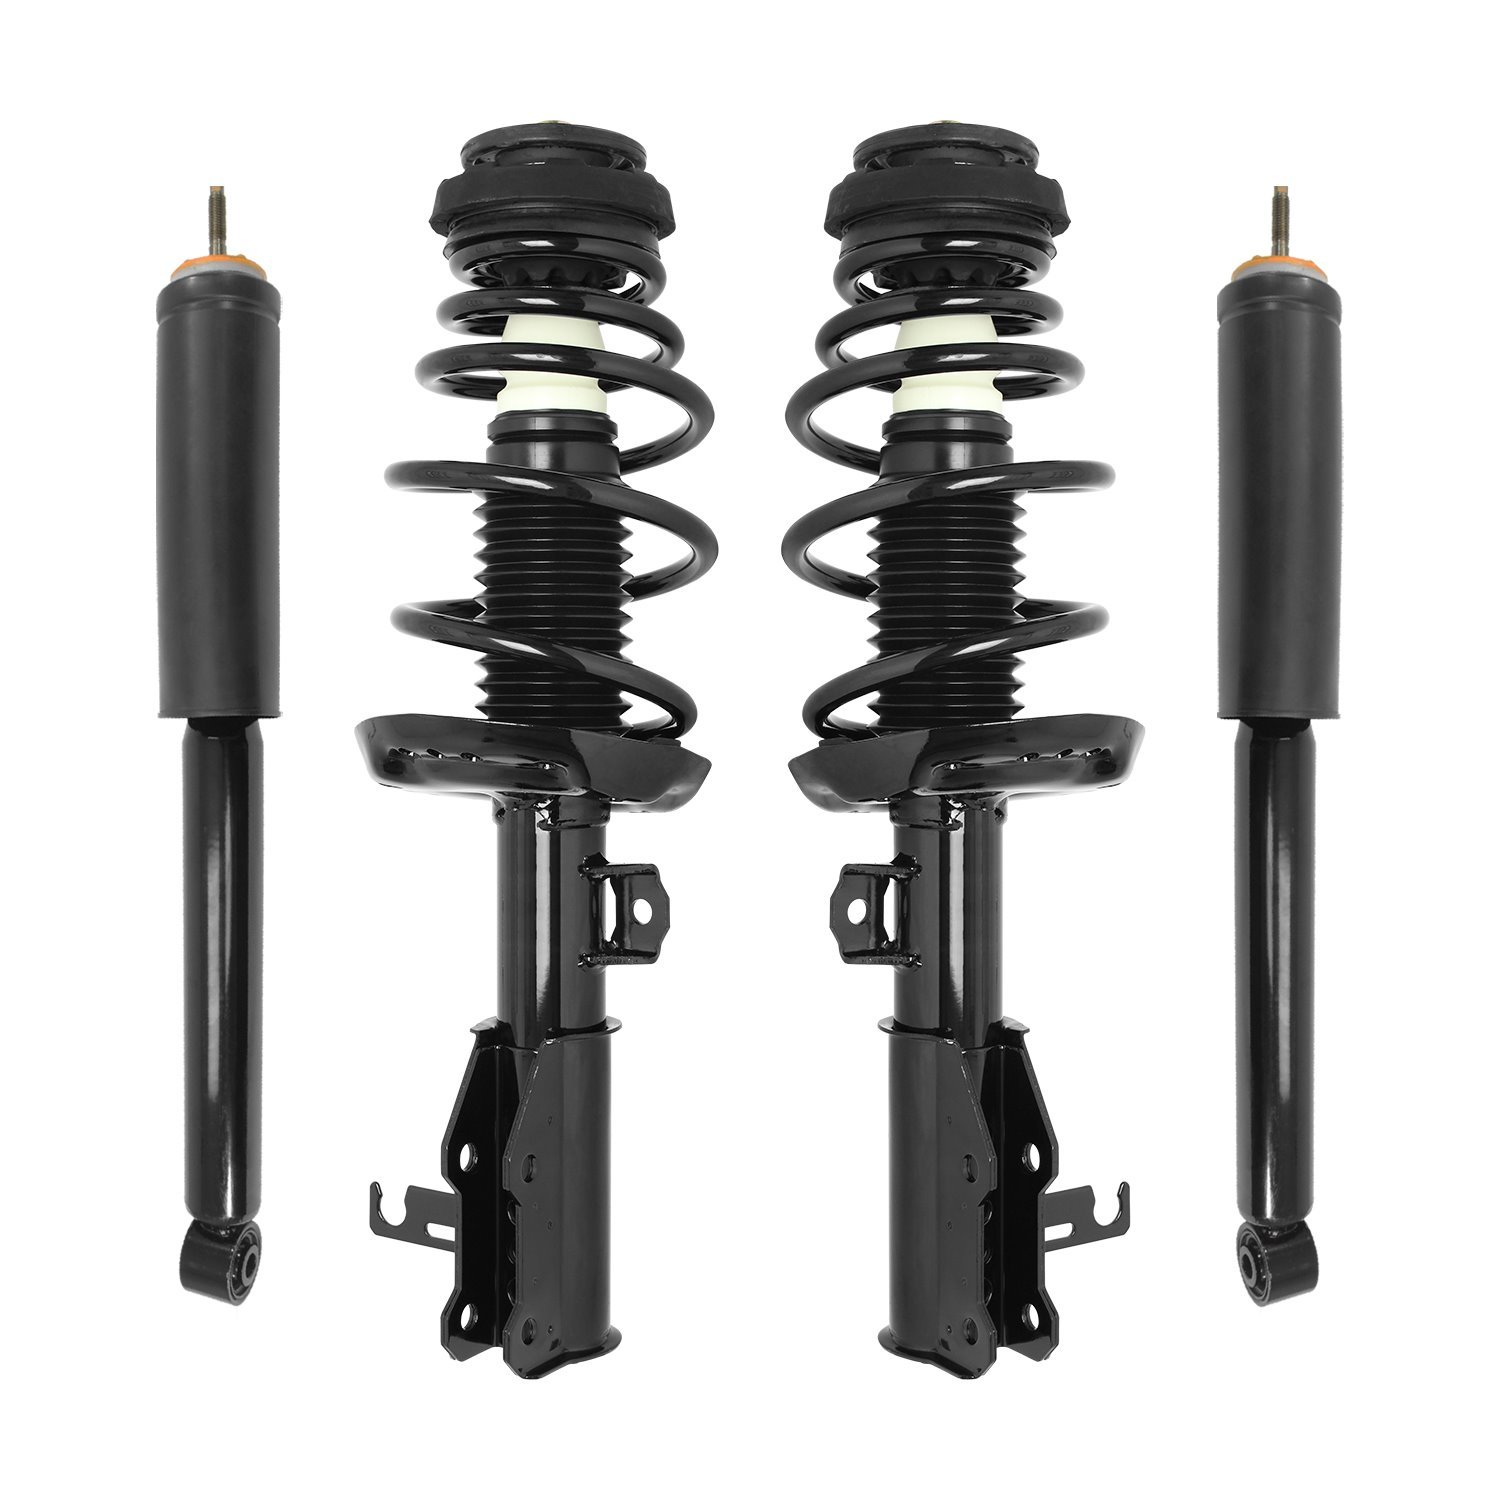 4-11033-251320-001 Suspension Strut & Coil Spring Assembly Fits Select Buick LaCrosse